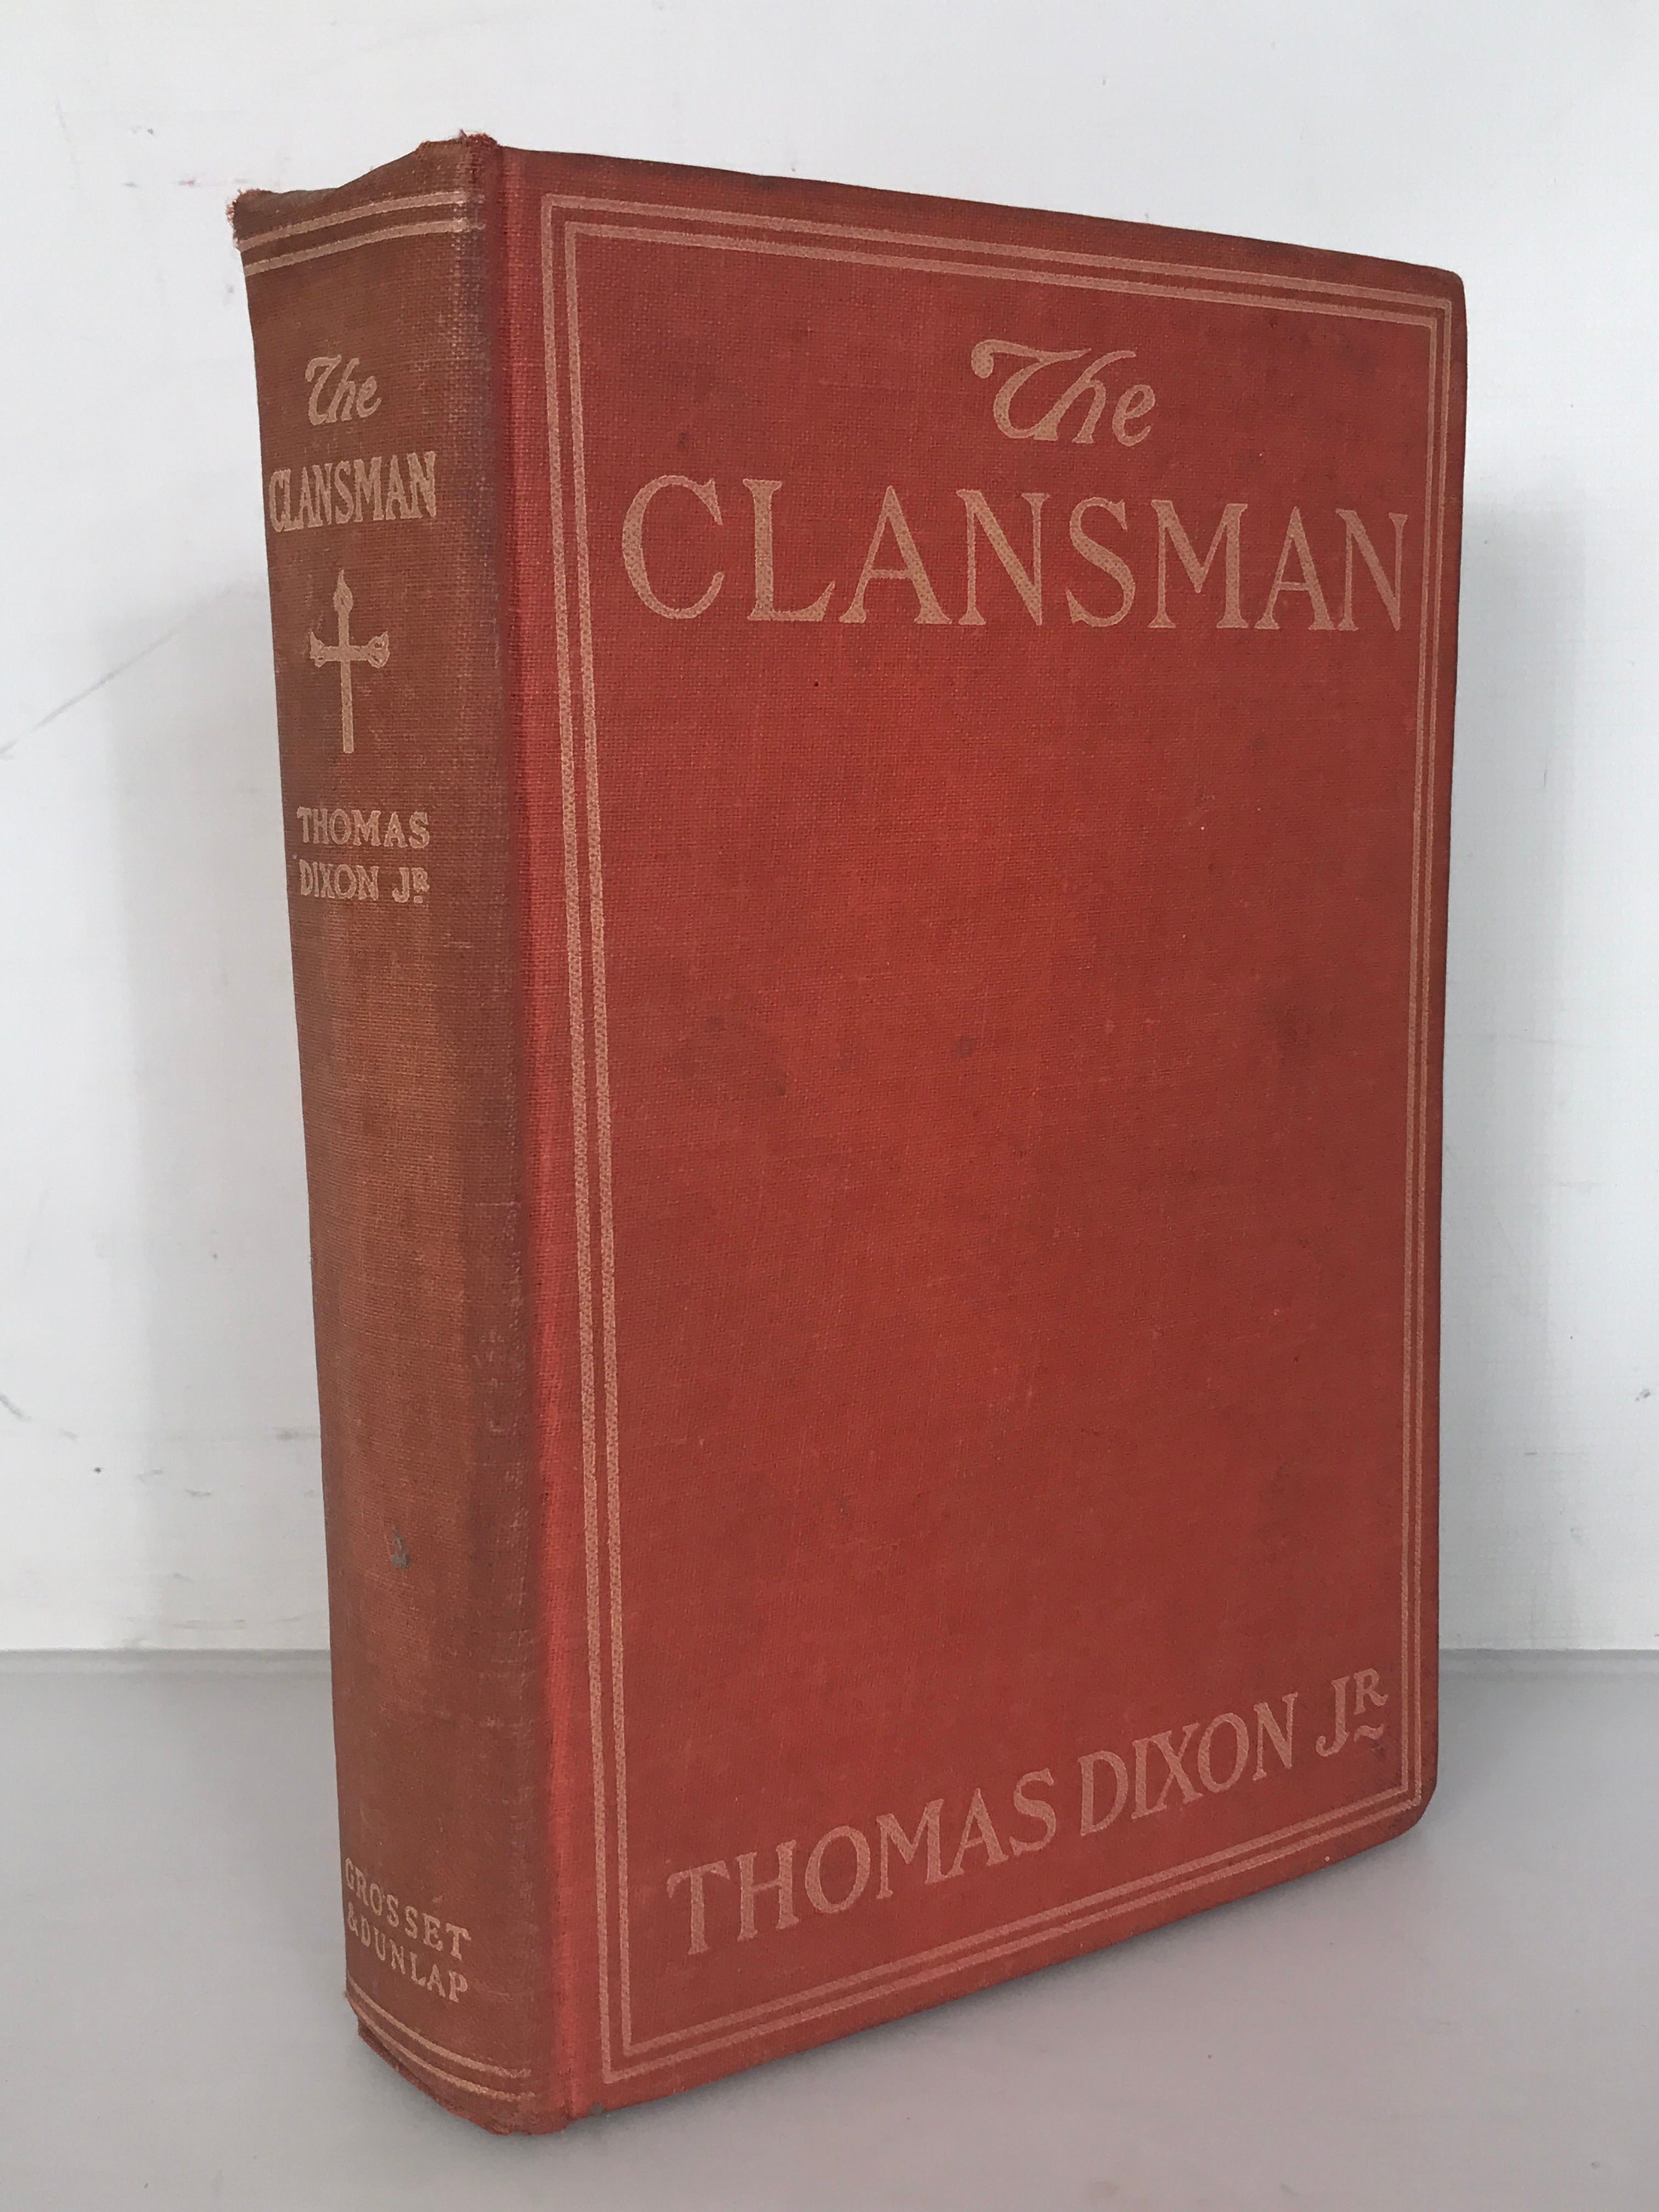 The Clansman by Thomas Dixon 1905 Illustrated HC